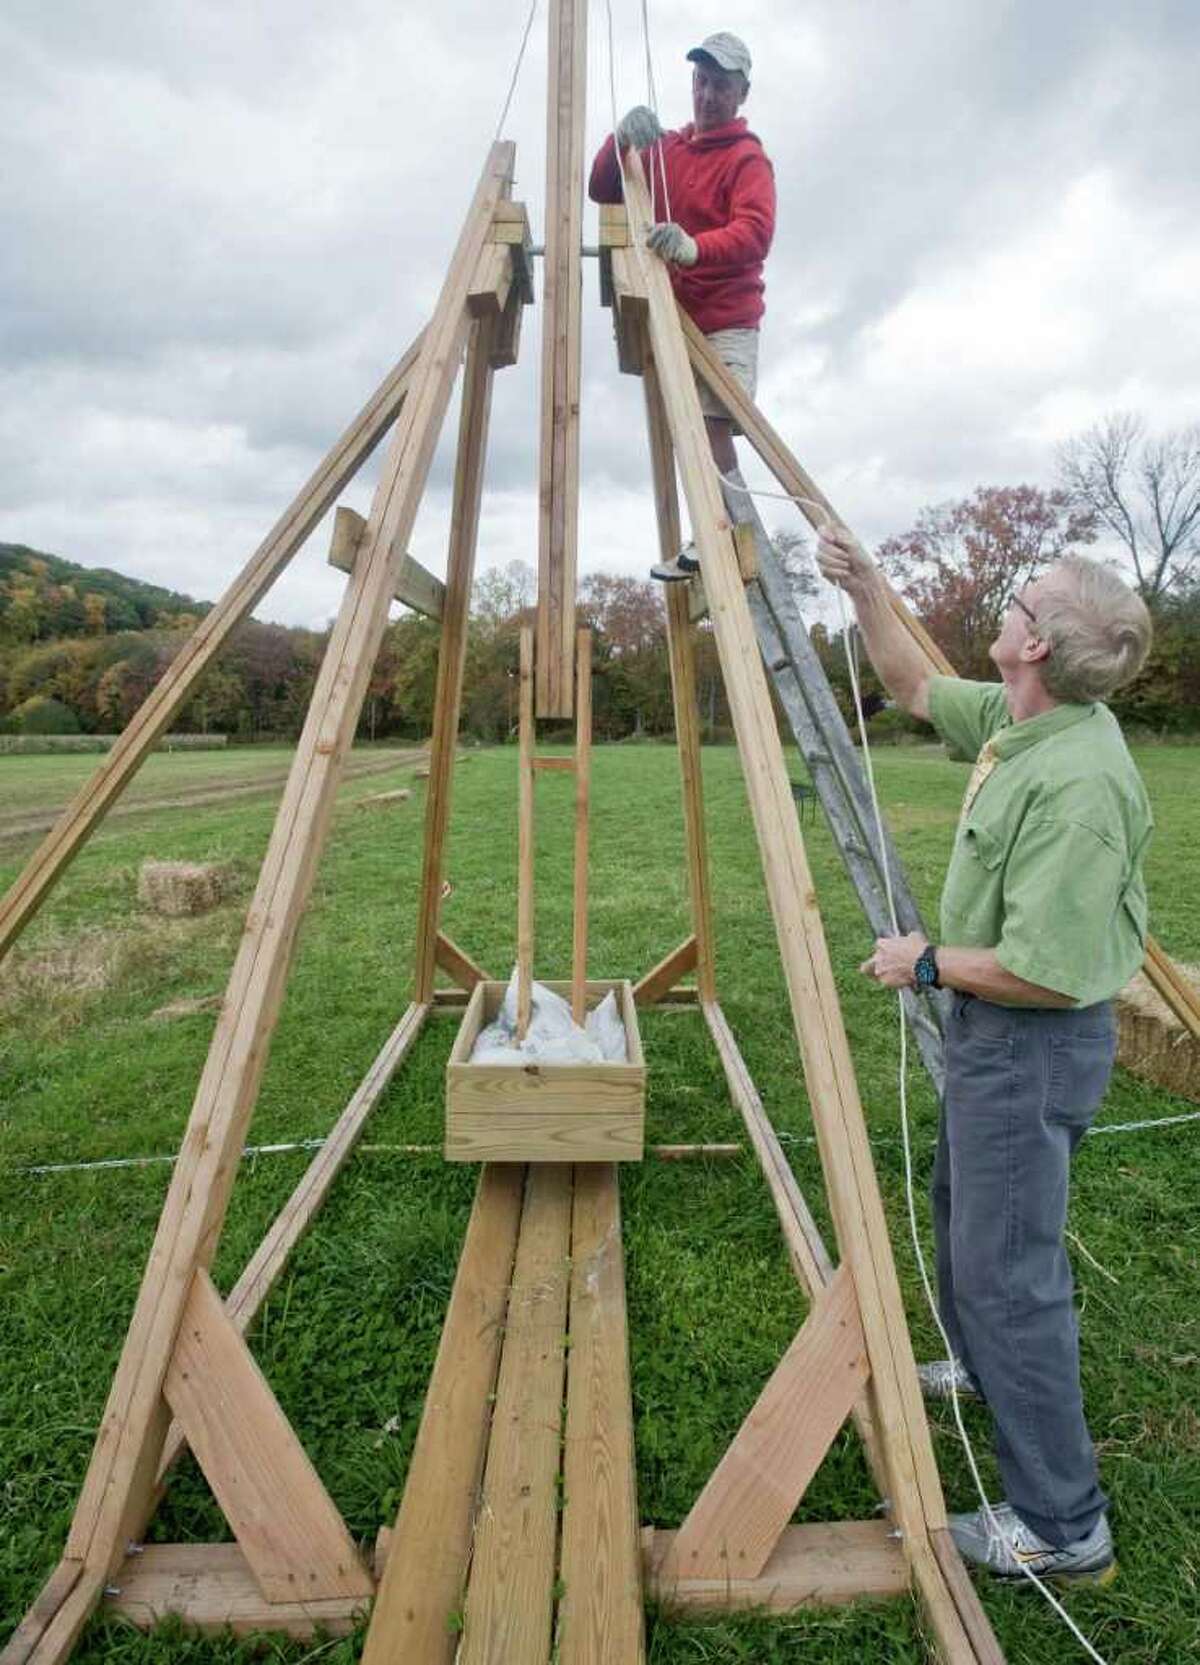 Newtown's Castle Hill Farm owner Steve Paproski works from the ladder as Newtown Middle School teacher Don Ramsey takes up the slack on the harness of a trebuchet, a medieval hurling machine that will launch pumpkins at the farm. Photo taken Thursday, Oct. 14, 2010